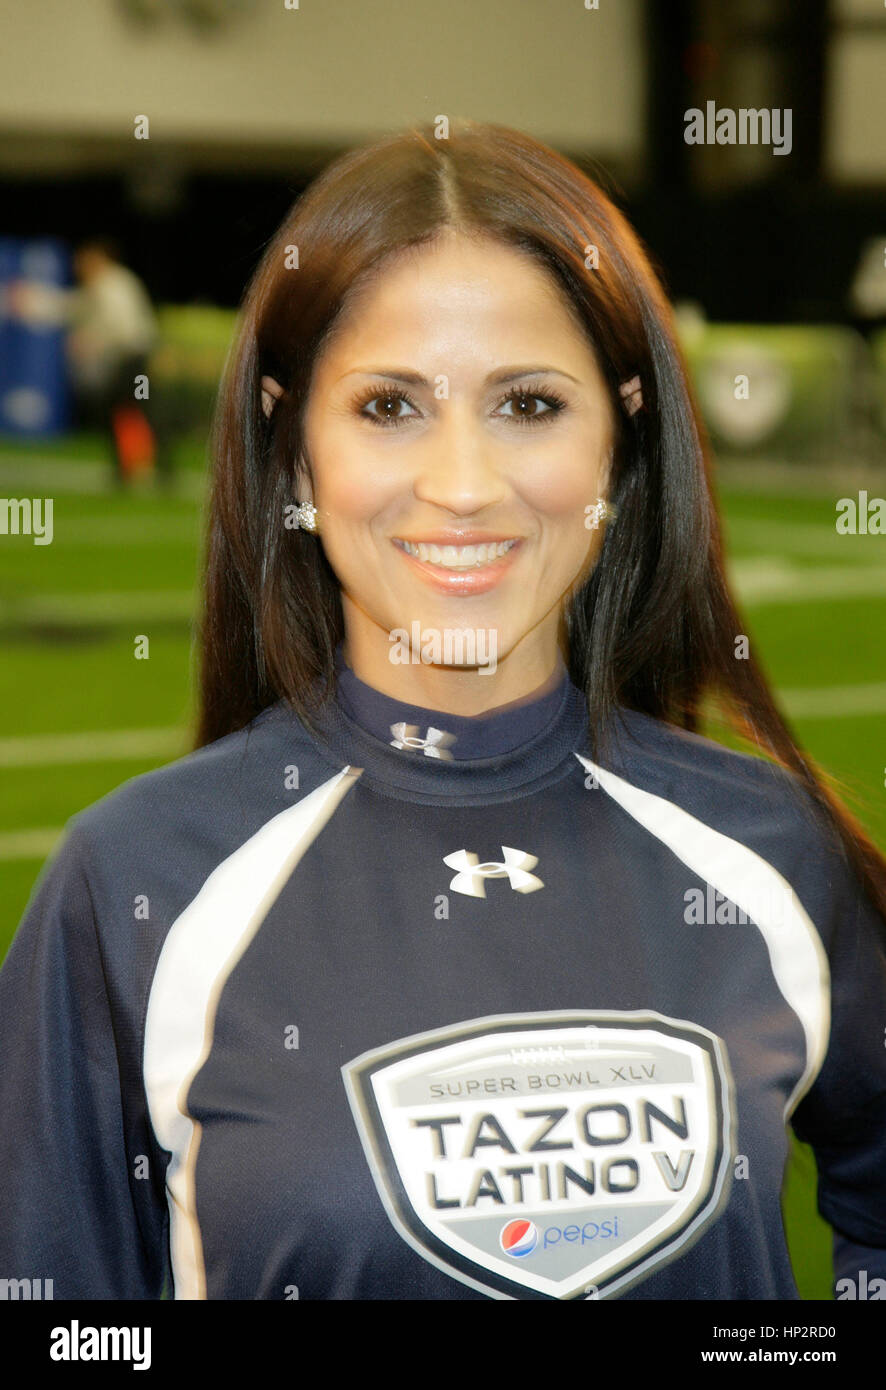 Jackie Guerrido at the Tazon Latino V flag football game at Super Bowl NFL Experience at the Dallas Convention Center on February 2, 2011 in Dallas, Texas. Photo by Francis Specker Stock Photo